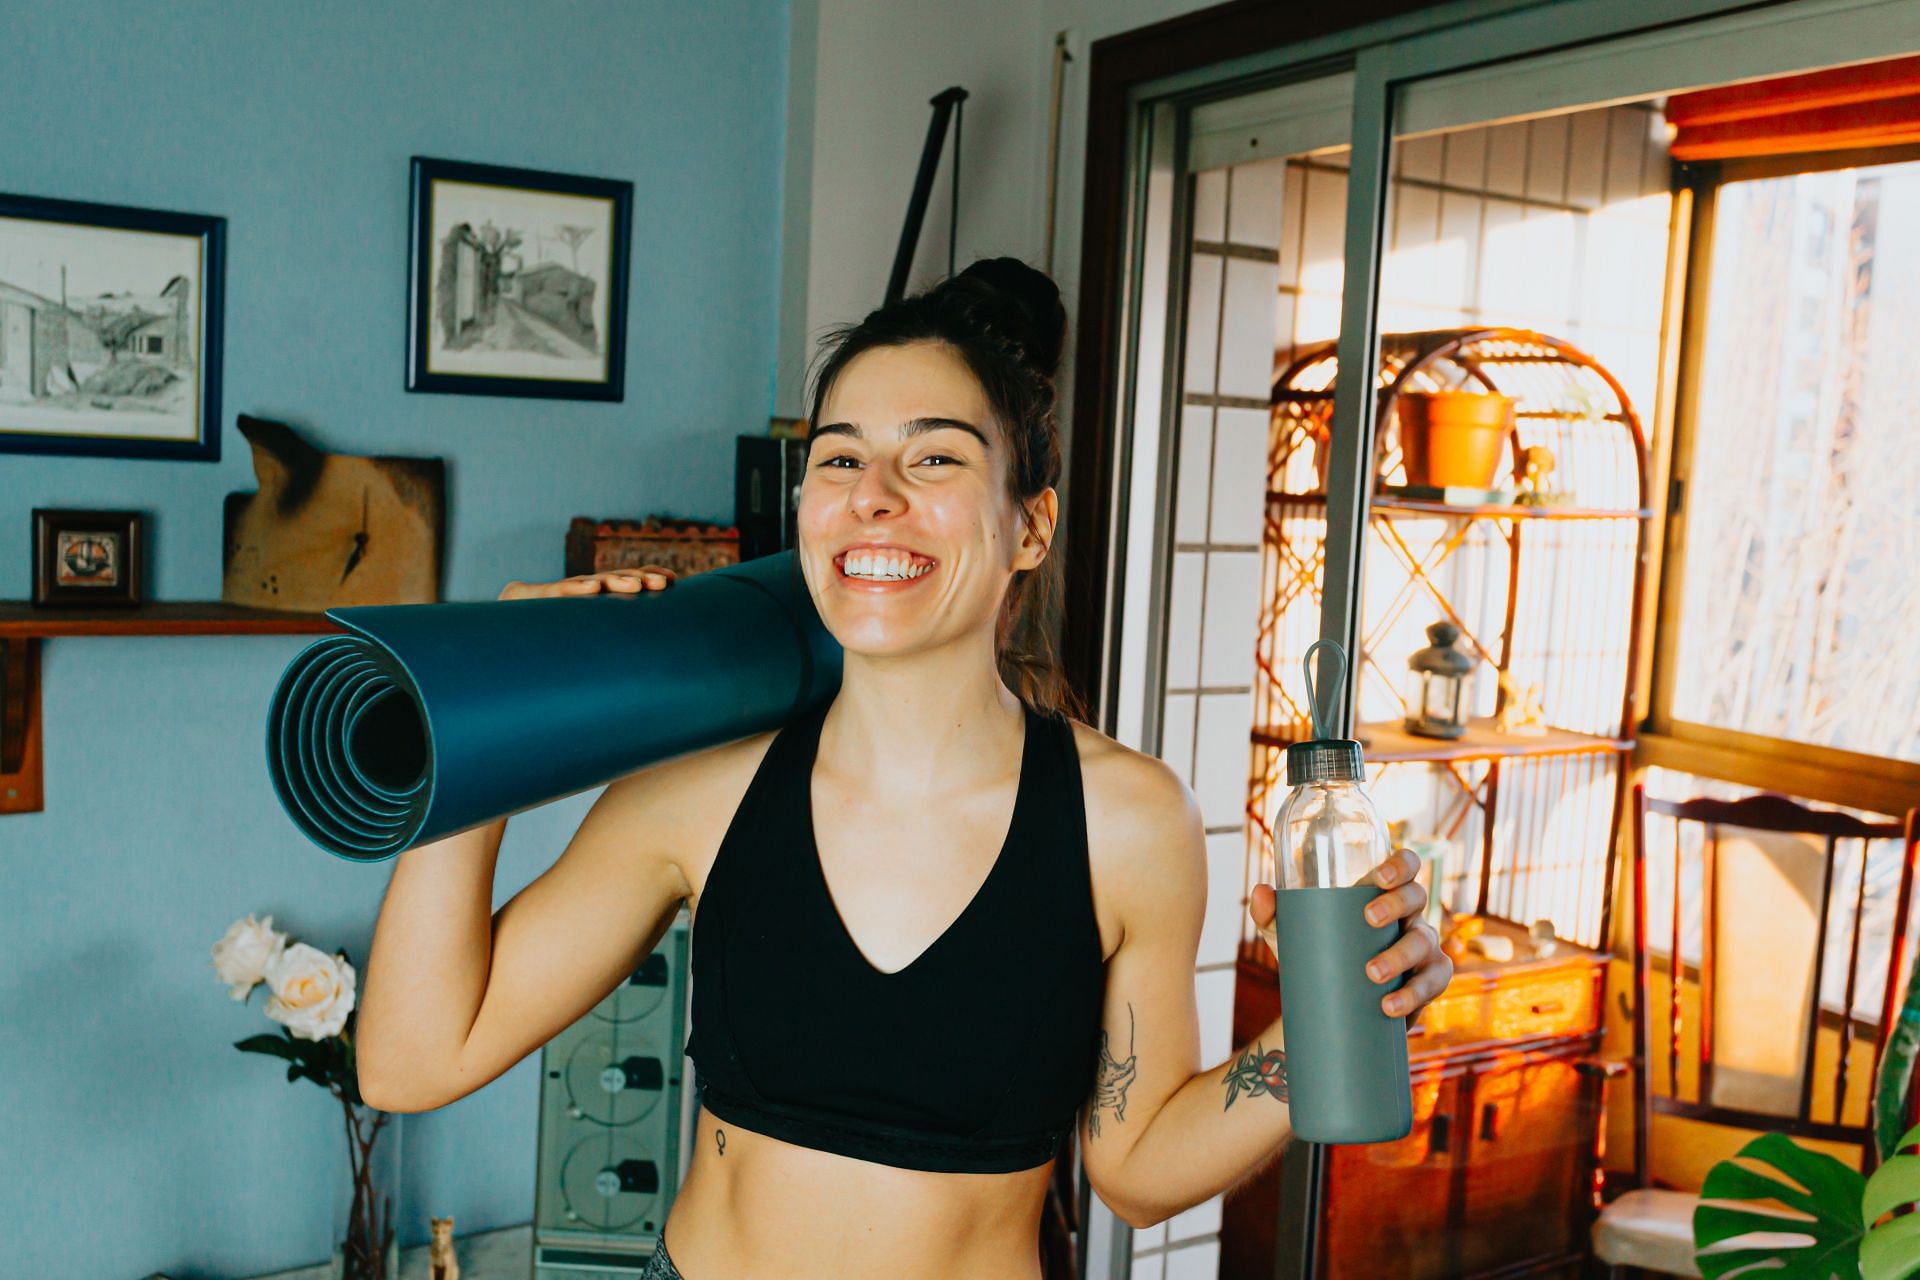 Emotional benefits of exercise - Makes you feel confident in your body (Image via Unsplash / Ave Calvar)